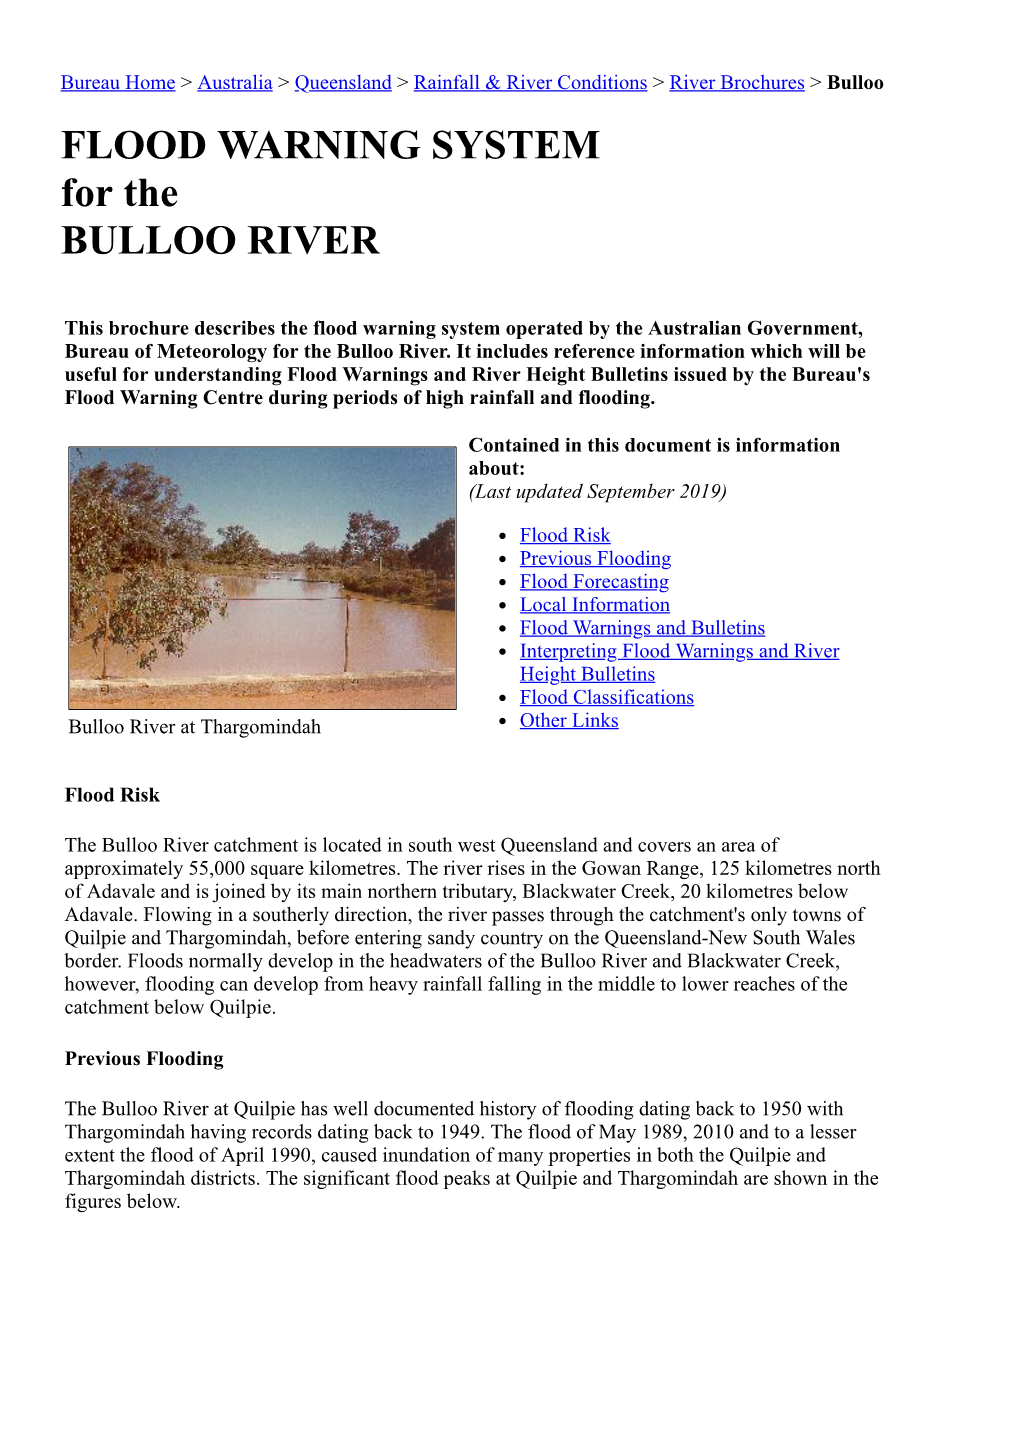 FLOOD WARNING SYSTEM for the BULLOO RIVER